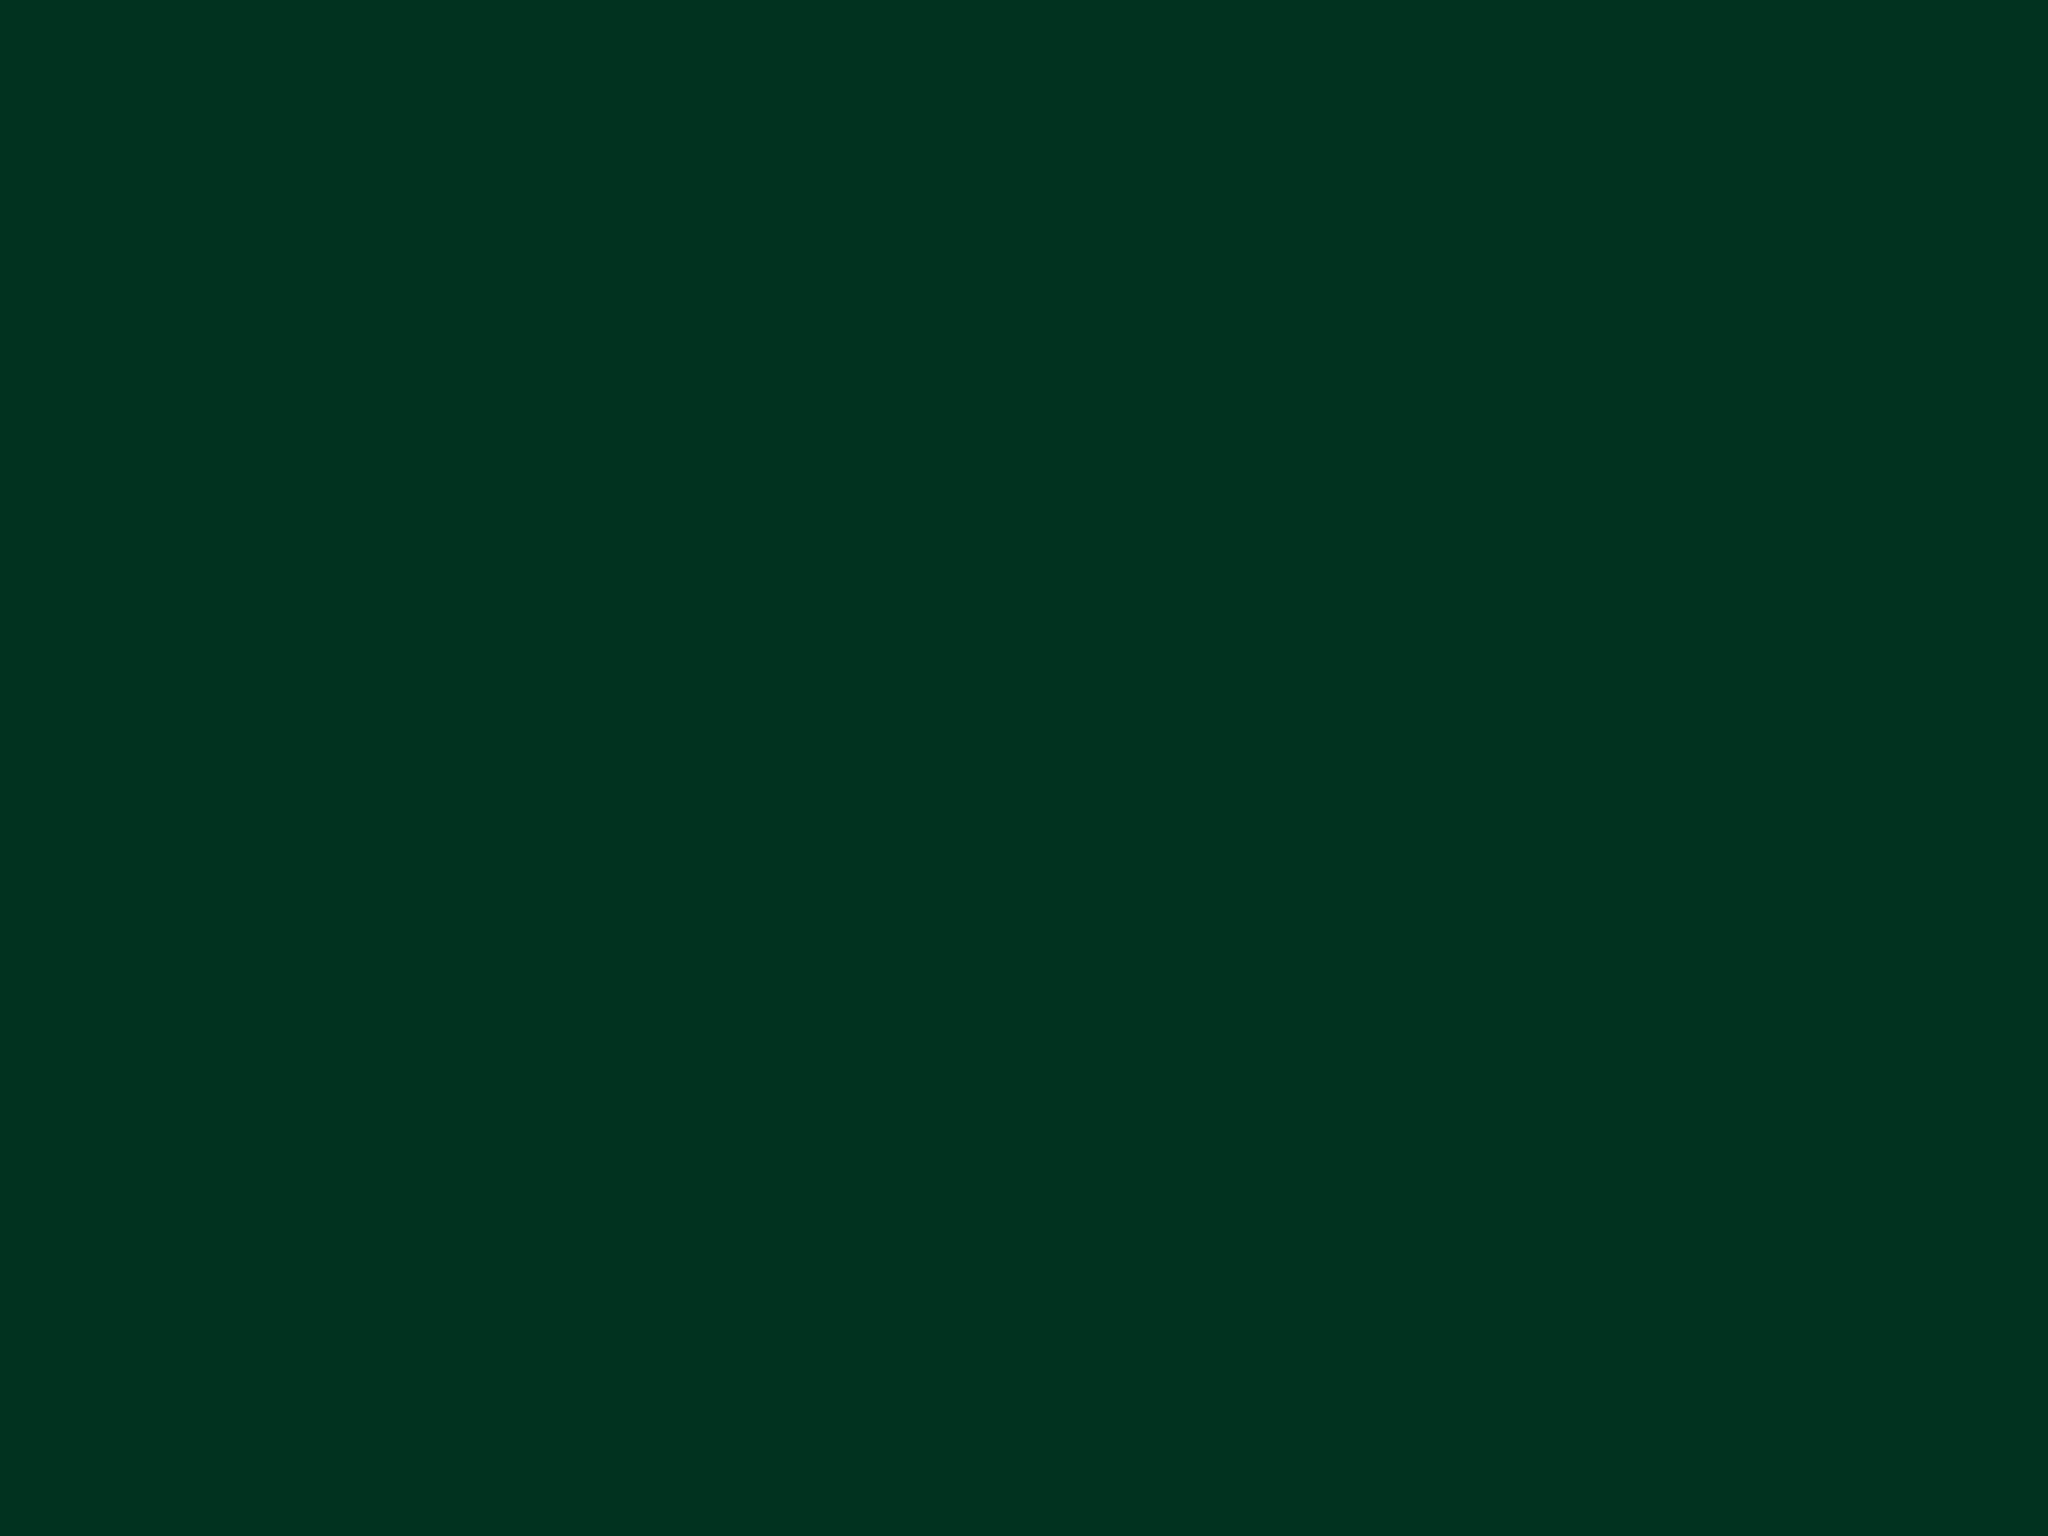 2048x1536 Dark Green Solid Color Background